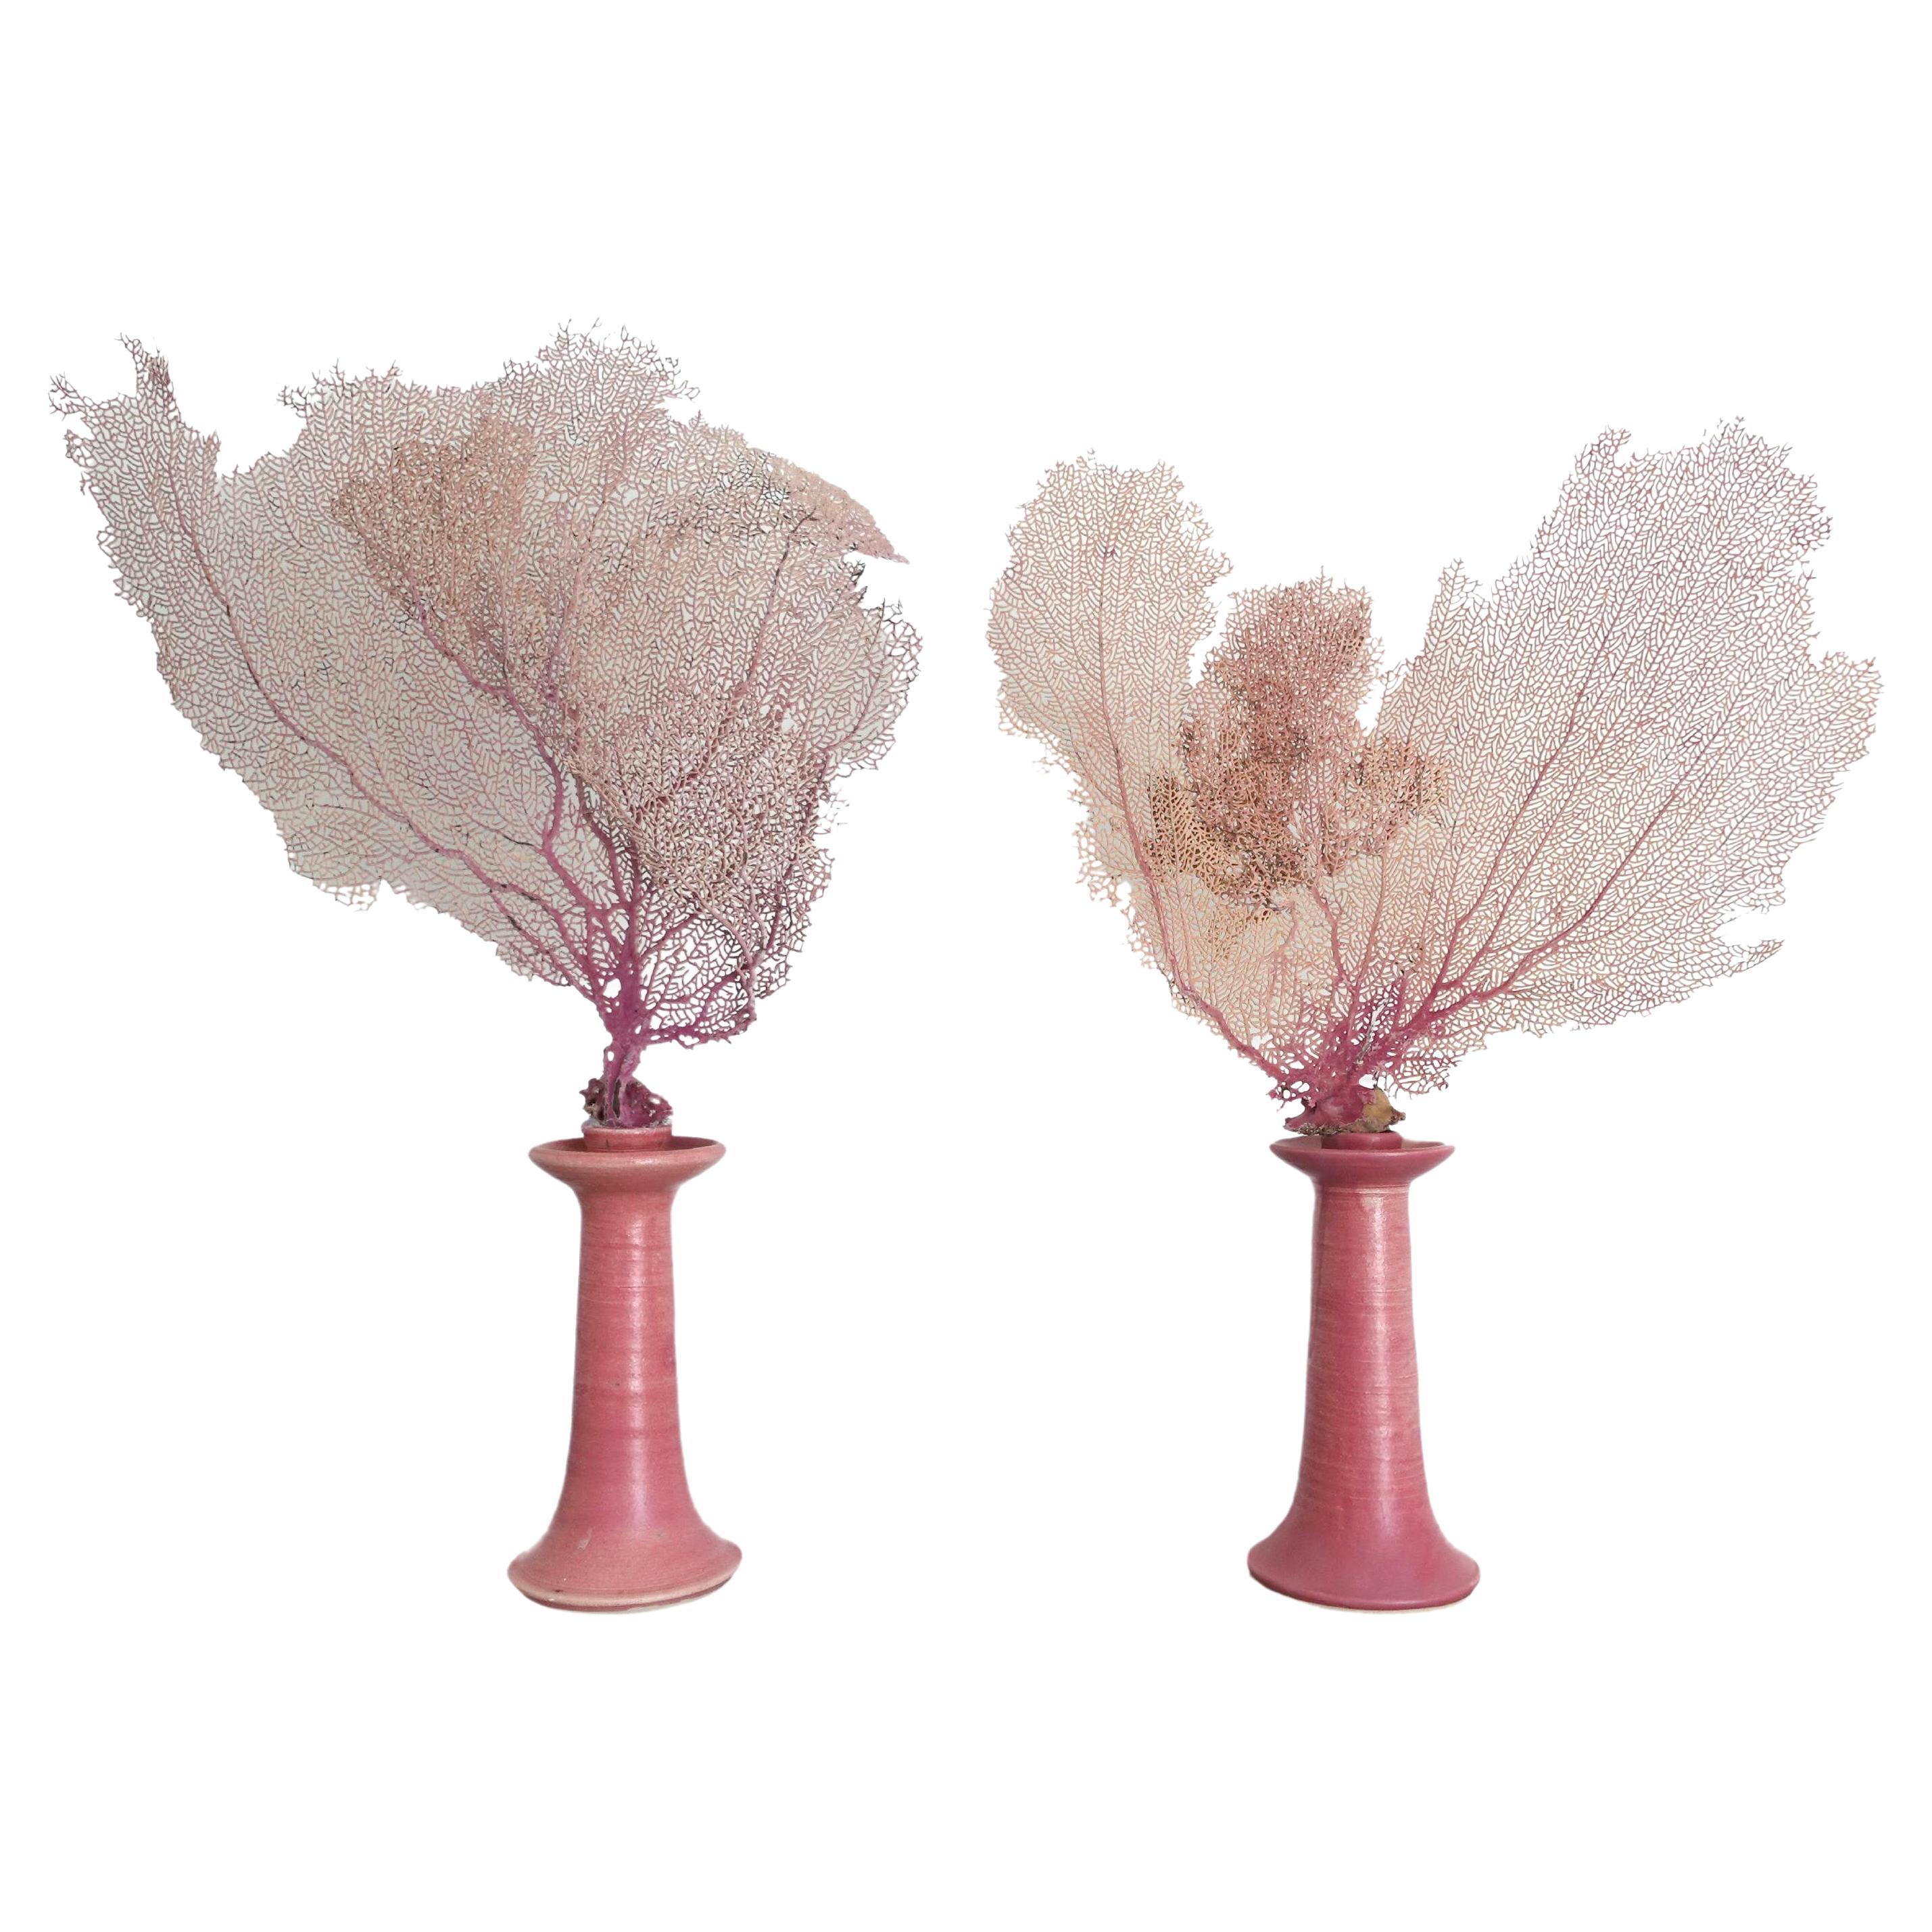 Pair of Pink Natural Sea Fans mounted to hand-made Candlesticks by Chriscoe